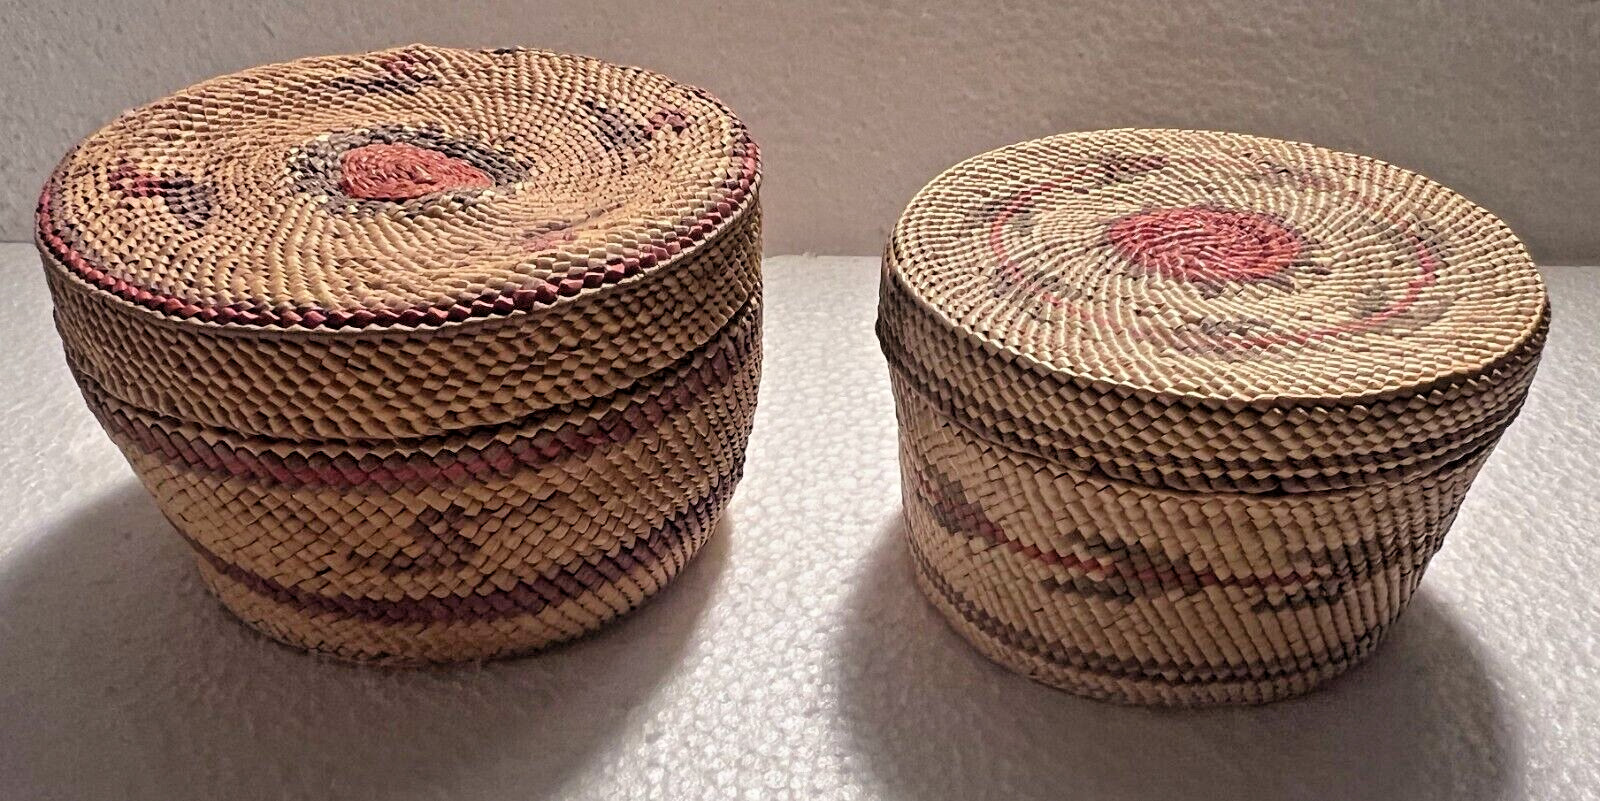 Two Native American Puyallup Lidded Baskets Pacific Northwest Washington State